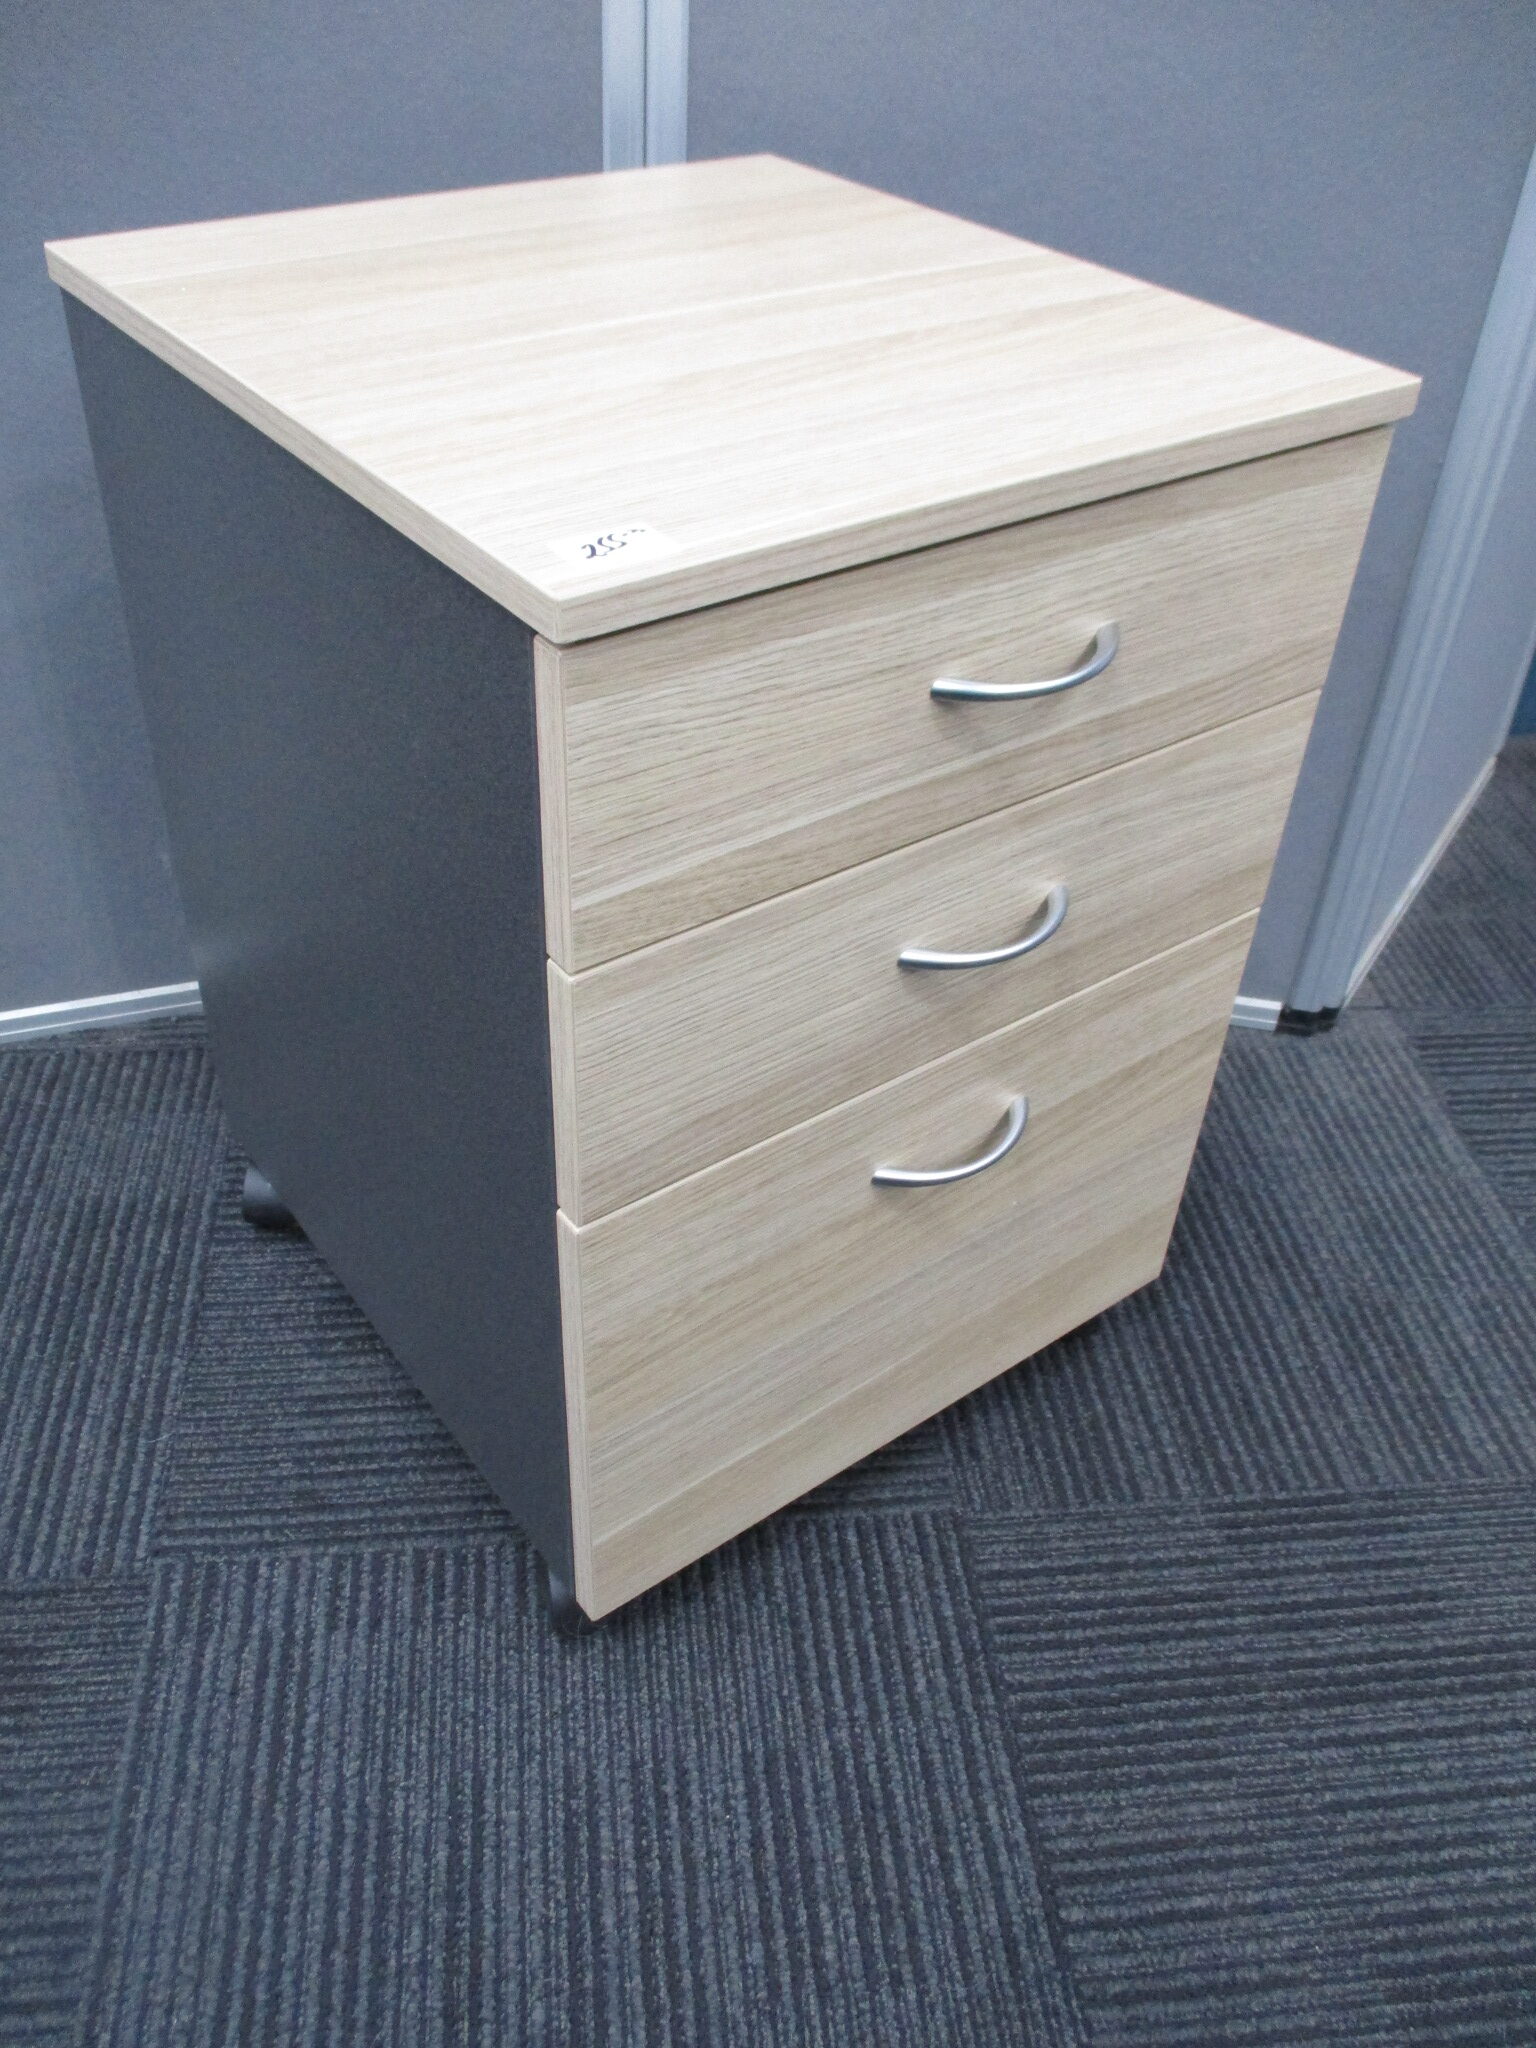 New Classic Oak and Ironstone 3 Drawer Mobile Pedestals $275